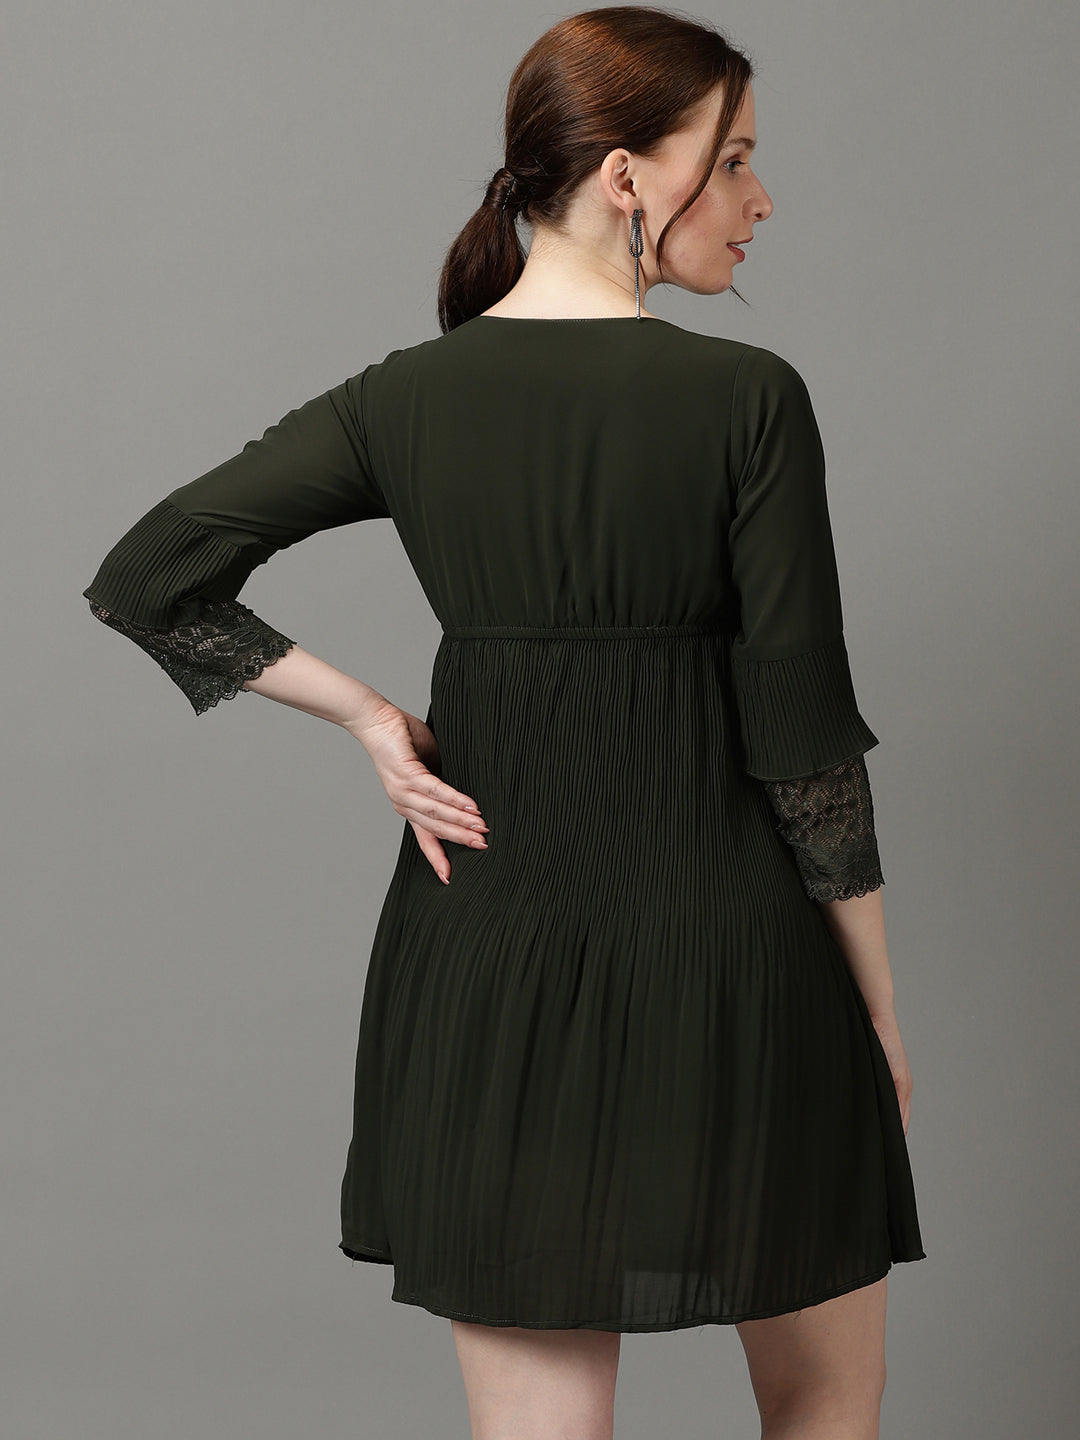 Women's Olive Solid Fit and Flare Dress